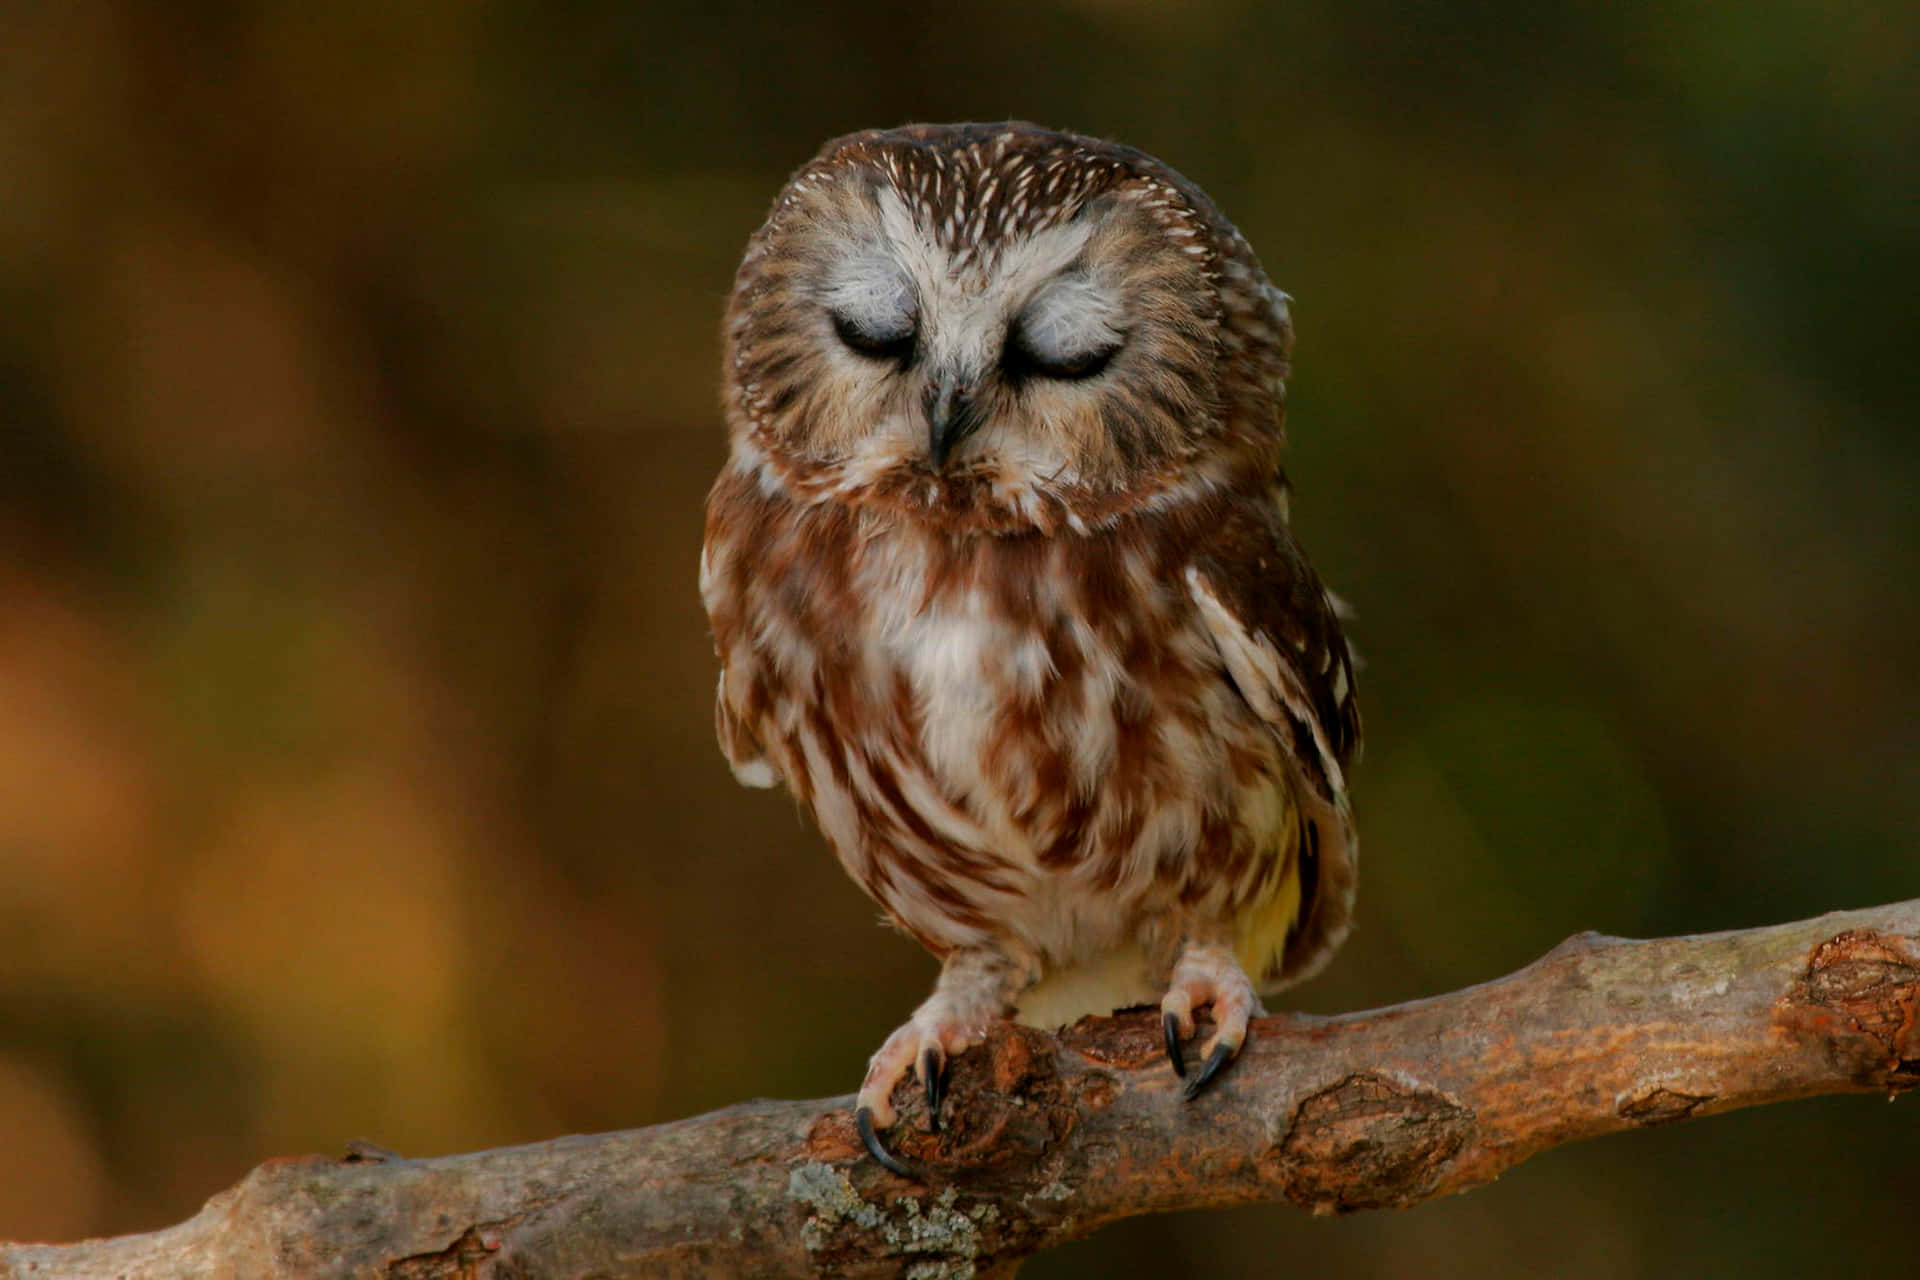 A Wise Young Baby Owl